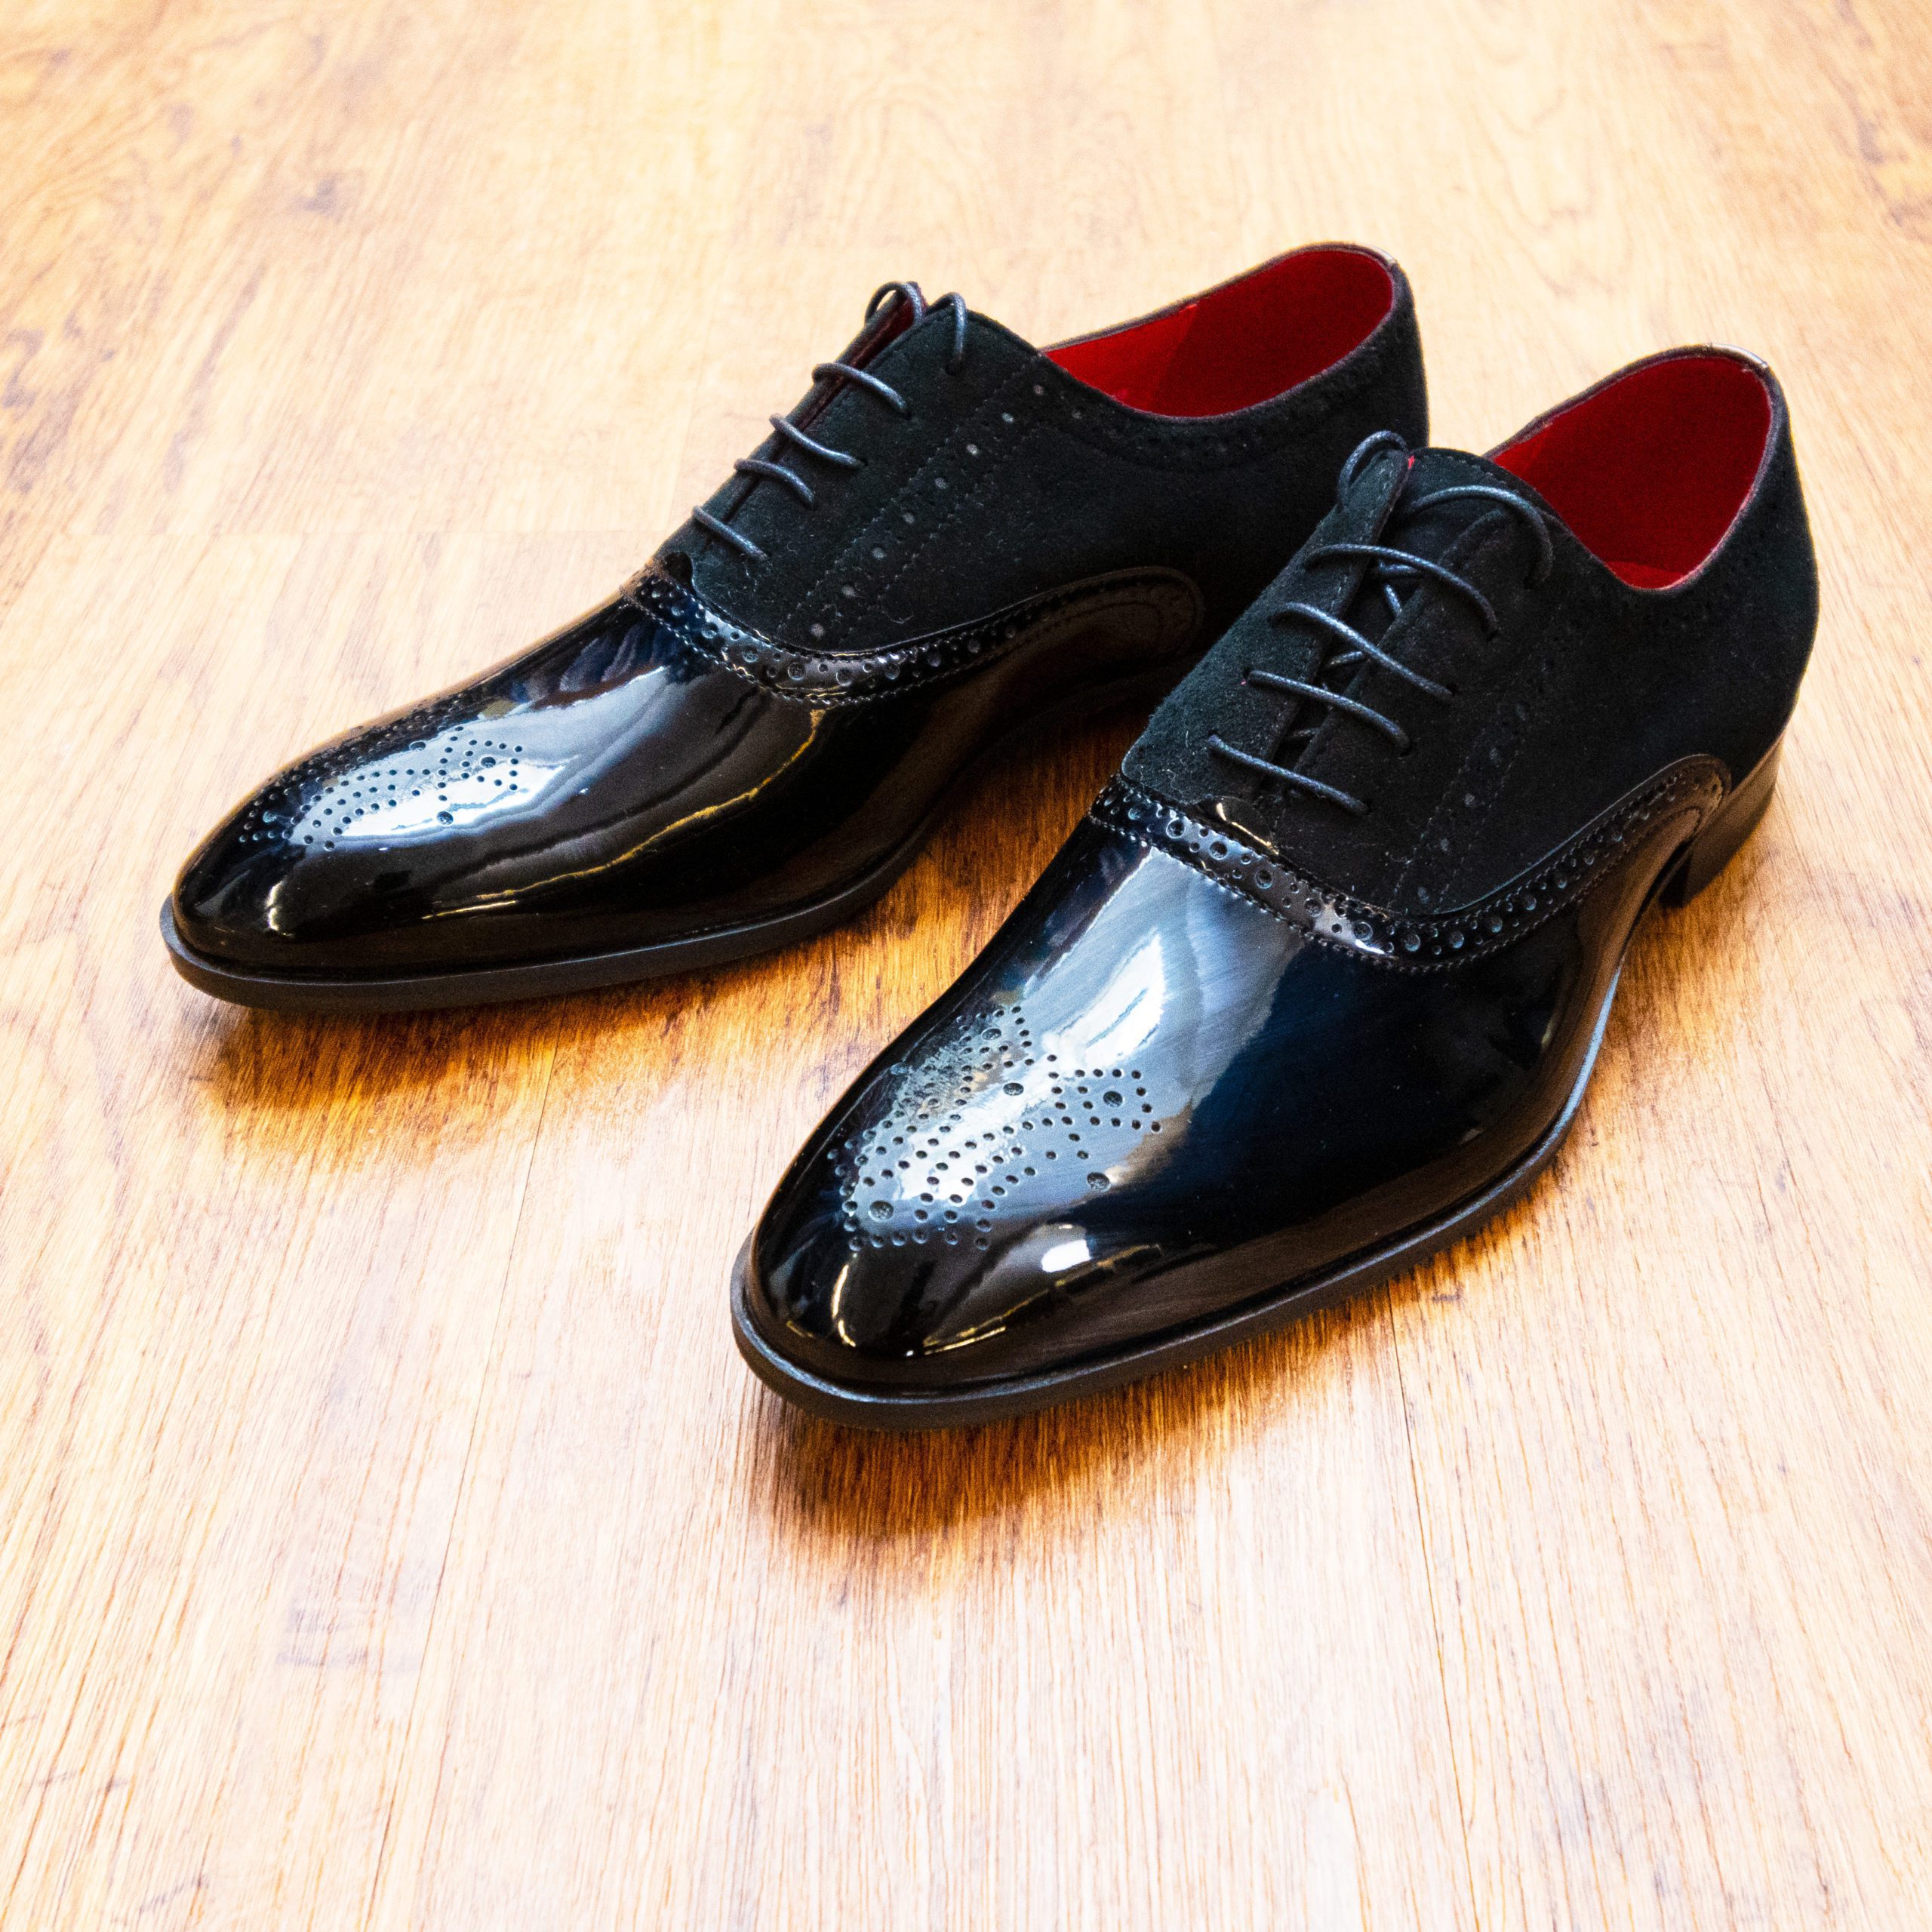 https://gabucci.co.uk/wp-content/uploads/2022/10/1643-lacuzzo-black-patent-leather-suede-brogue-scaled.jpg